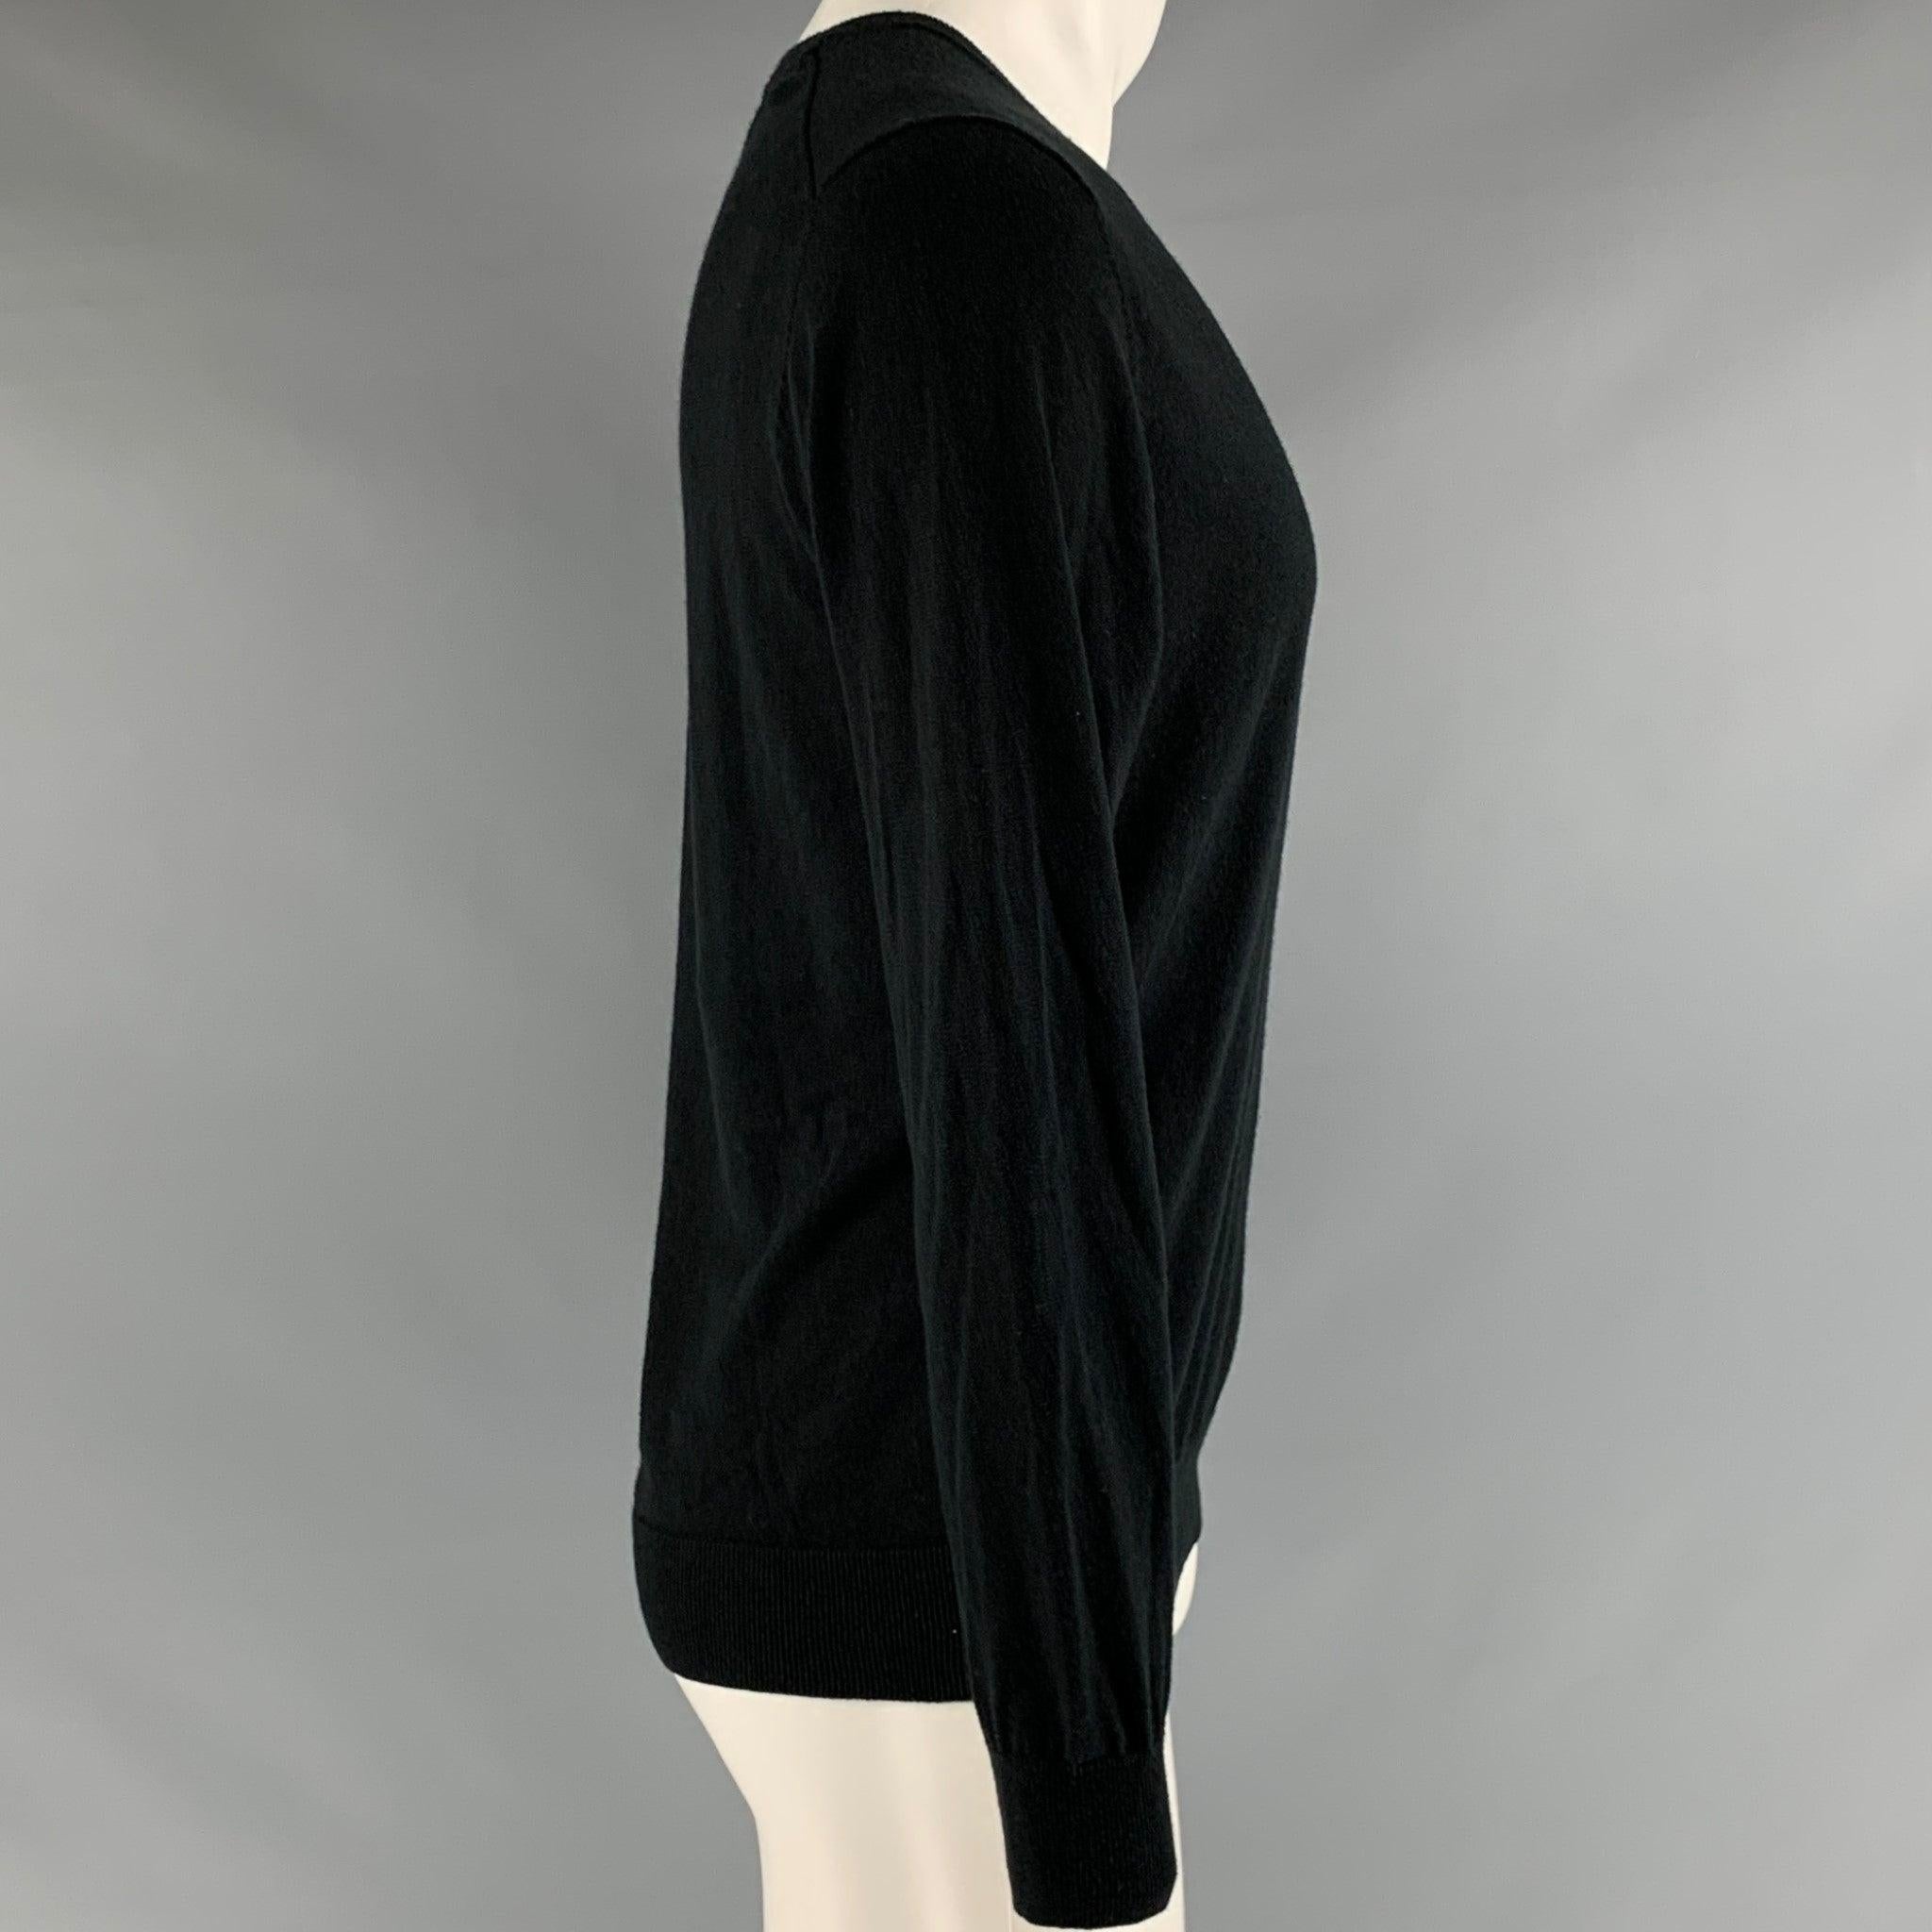 MASSIMO DUTTI pullover
in a black cotton/silk/cashmere blend knit featuring blouson sleeves and a V-neck.Excellent Pre-Owned Condition. 

Marked:   S 

Measurements: 
 
Shoulder: 17 inches Chest: 37 inches Sleeve: 24 inches Length: 25 inches 
  
  
